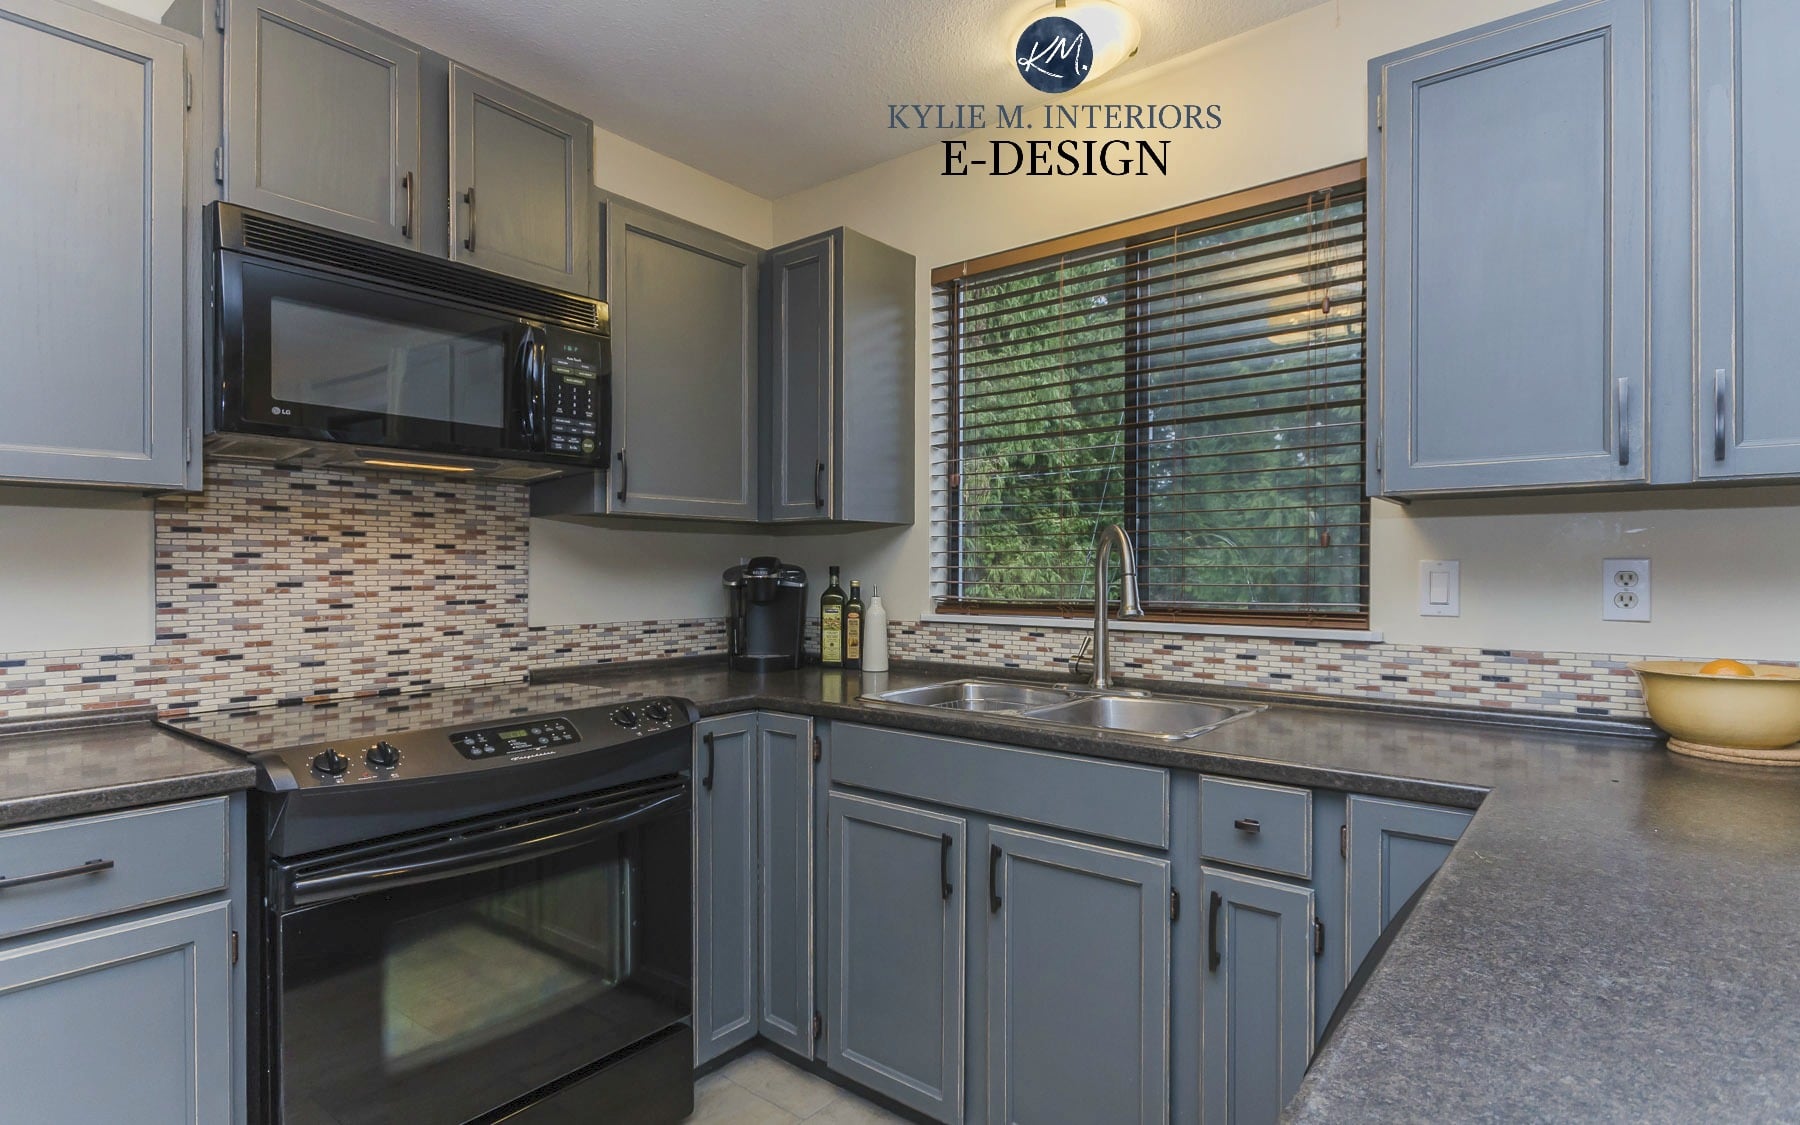 Benjamin Moore Chelsea Gray, painted oak wood cabinets. Mineral Jet formica lamiante countertop. Kylie m INteriors Edesign, budget friendly kitchen remodel. Artez photography